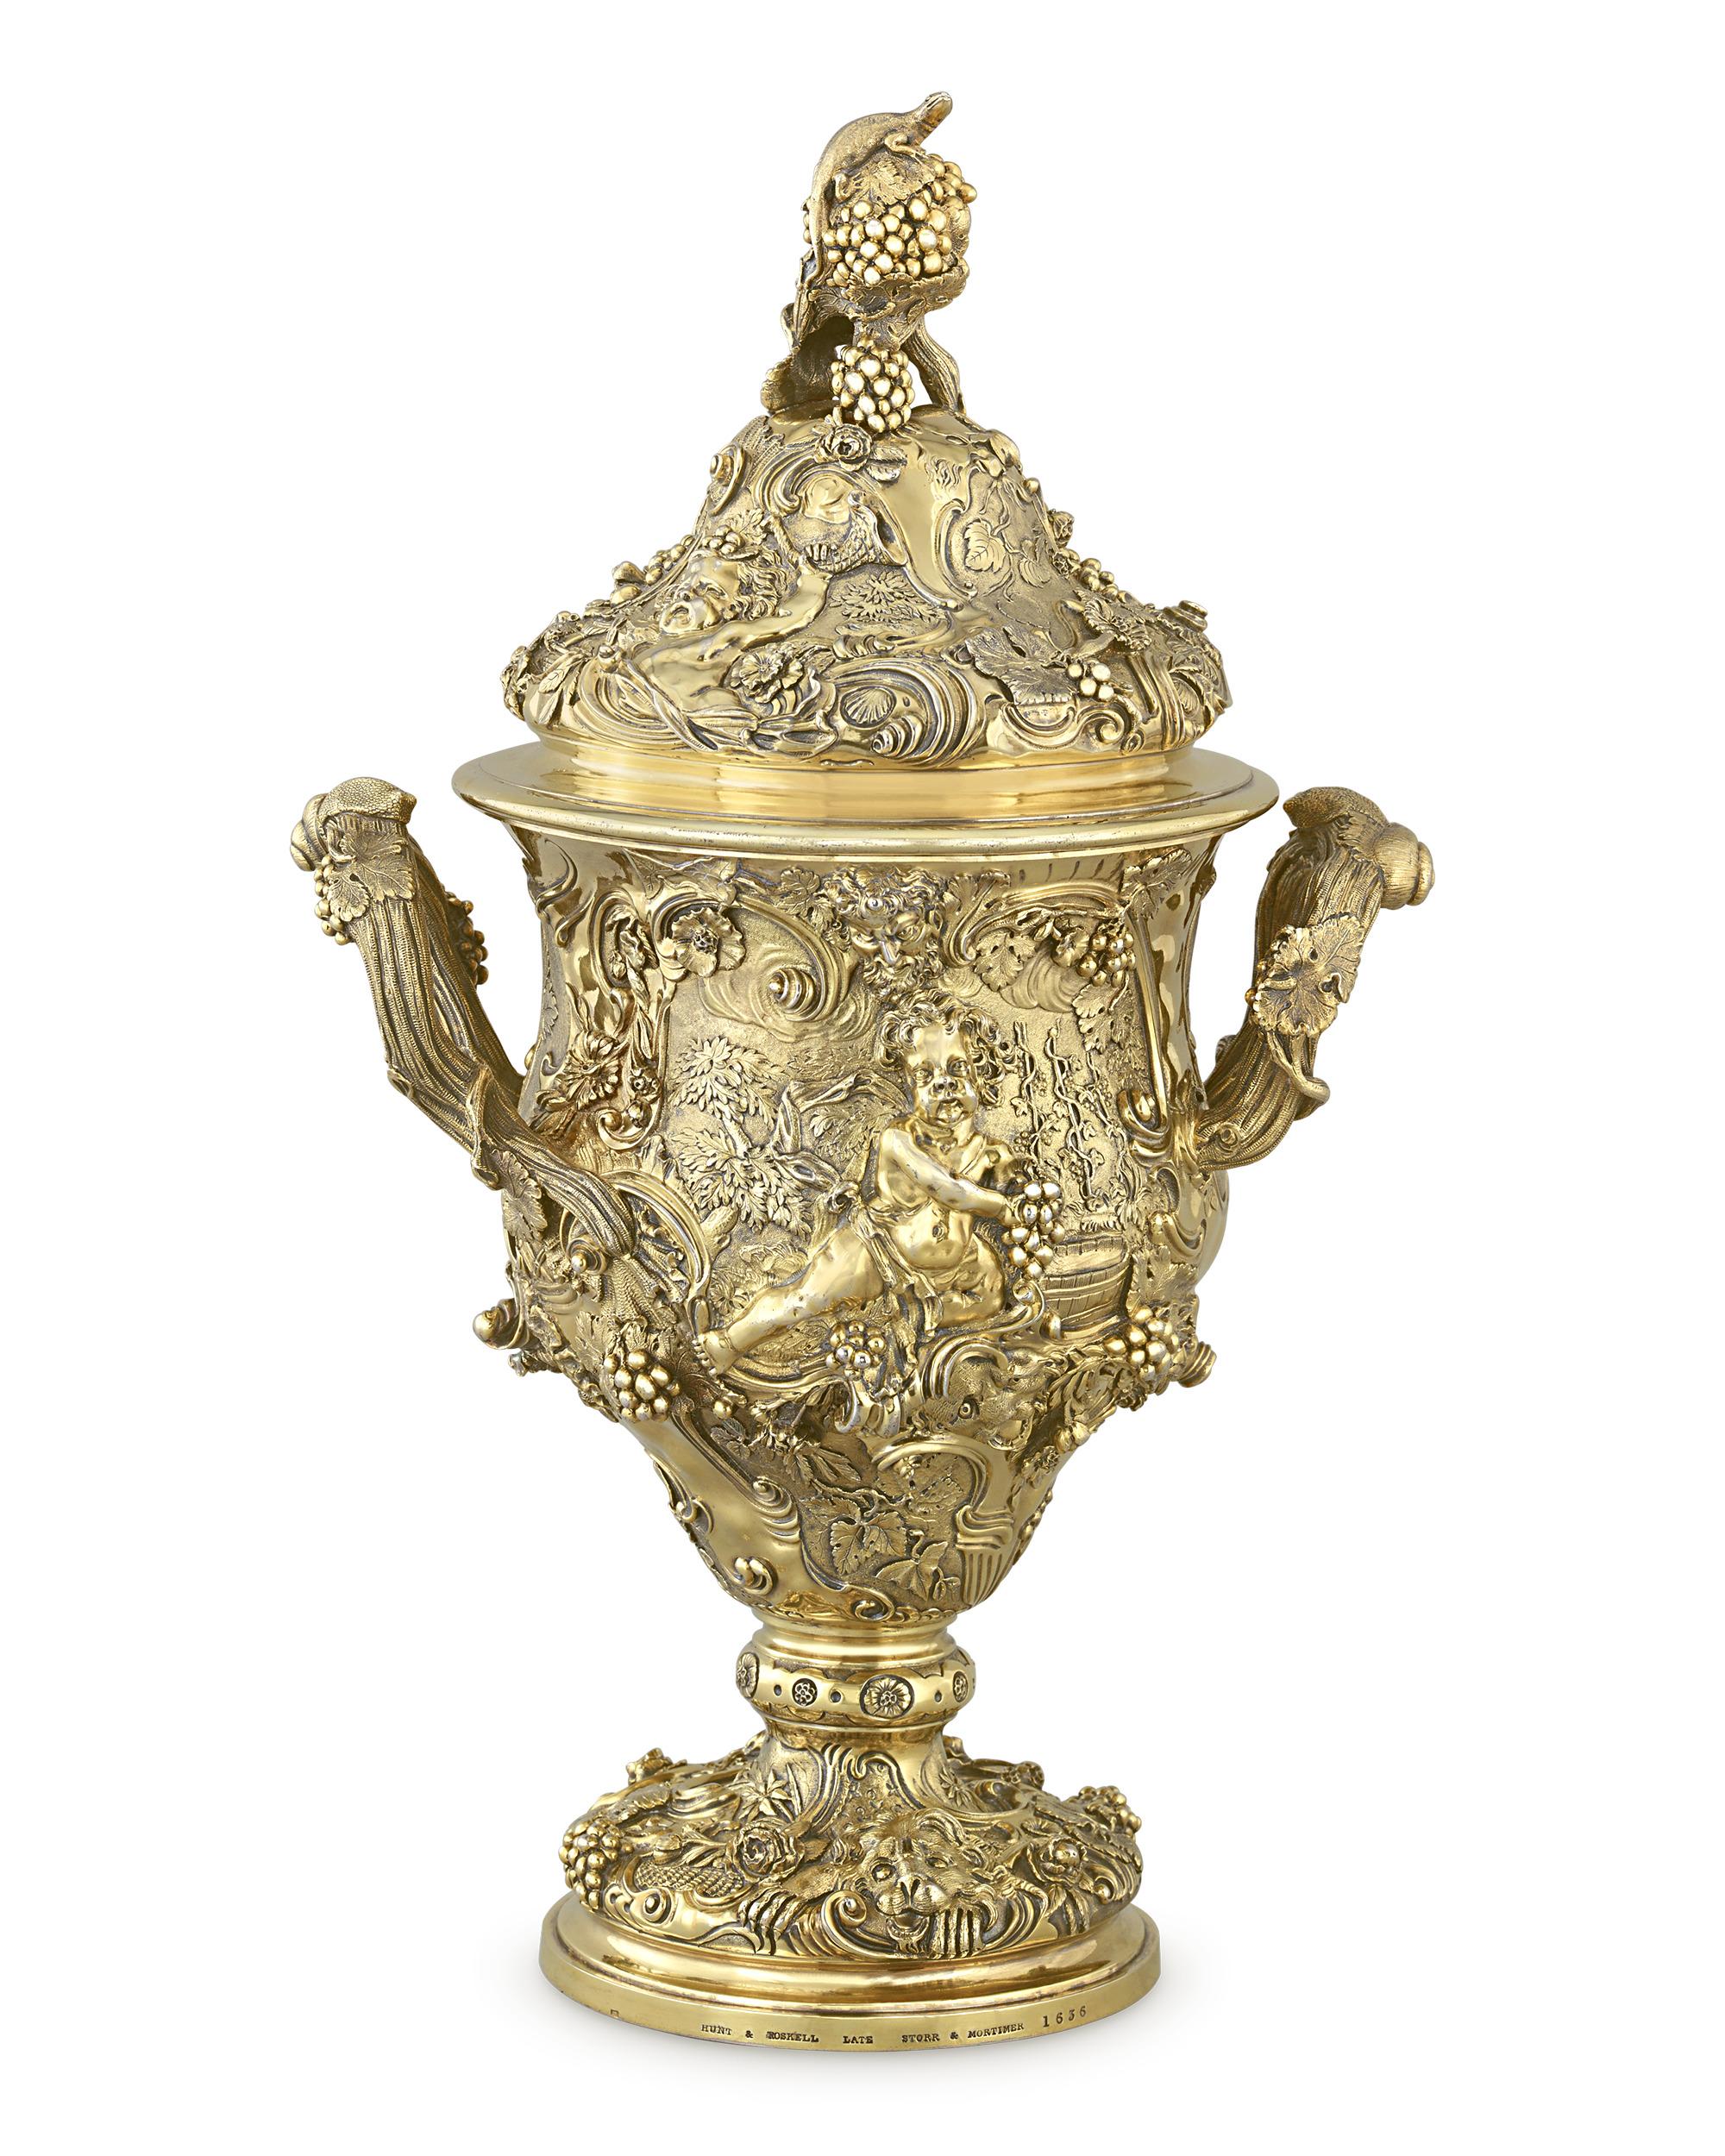 This exquisite 1897 two-handled presentation cup by esteemed silver firm Hunt & Roskell was modeled after a 1743 cup made by Paul Lamerie, the most famed London-based silversmith of the 18th century. The cup was presented to Sir David Salomons, the